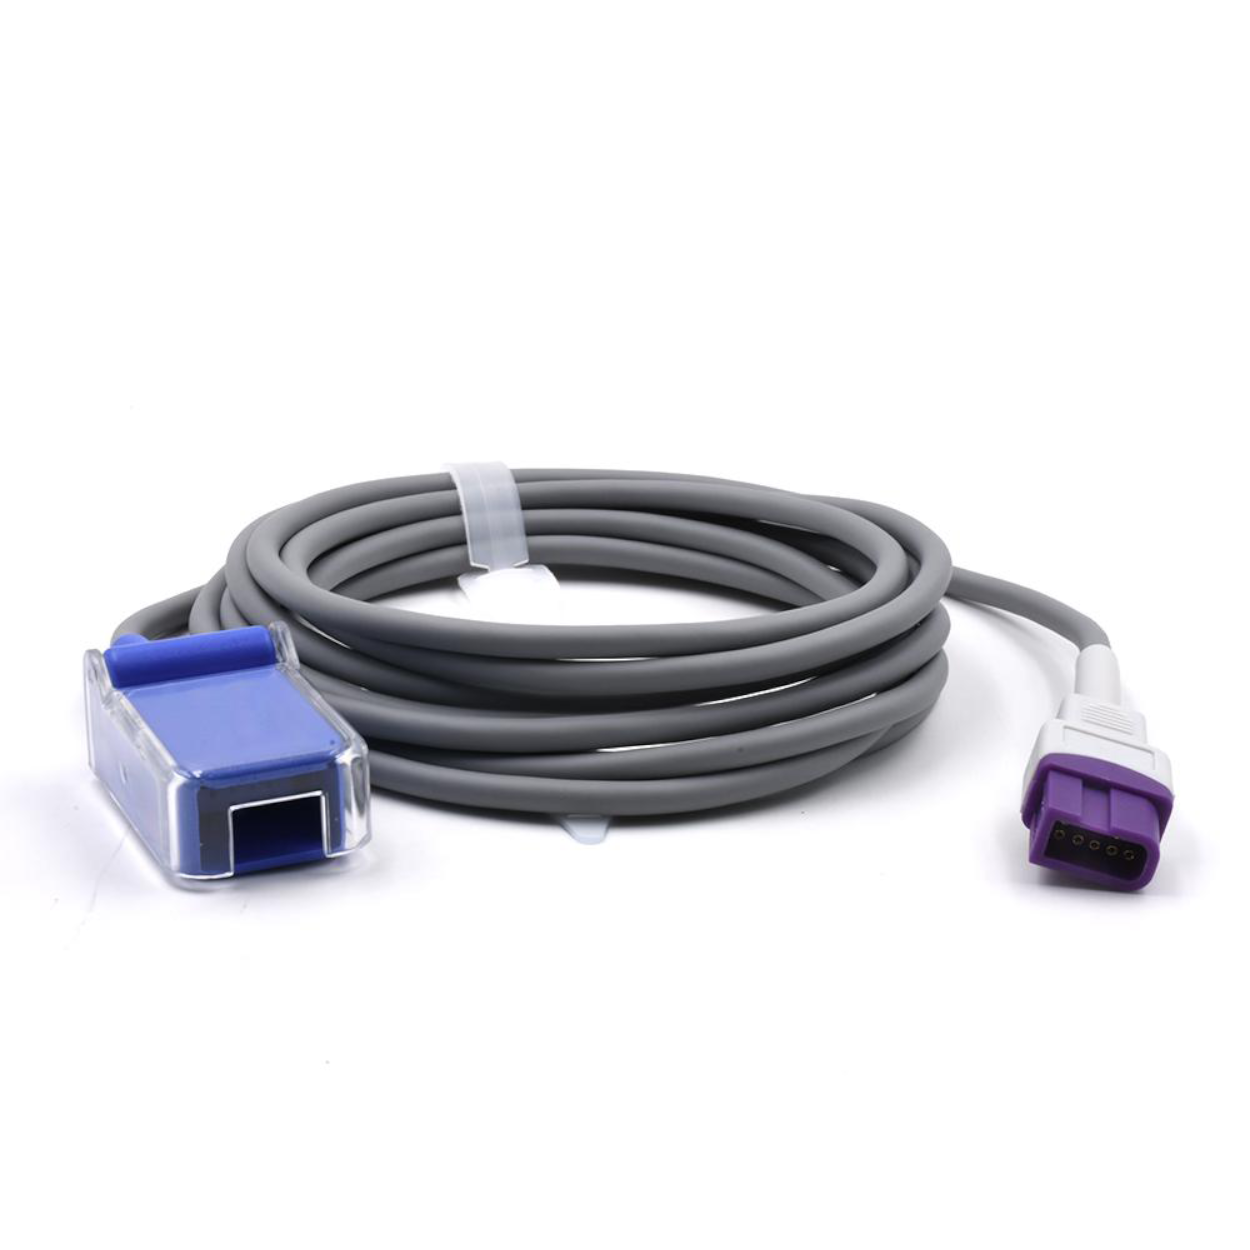 Spacelabs Spo2 Extension Cable